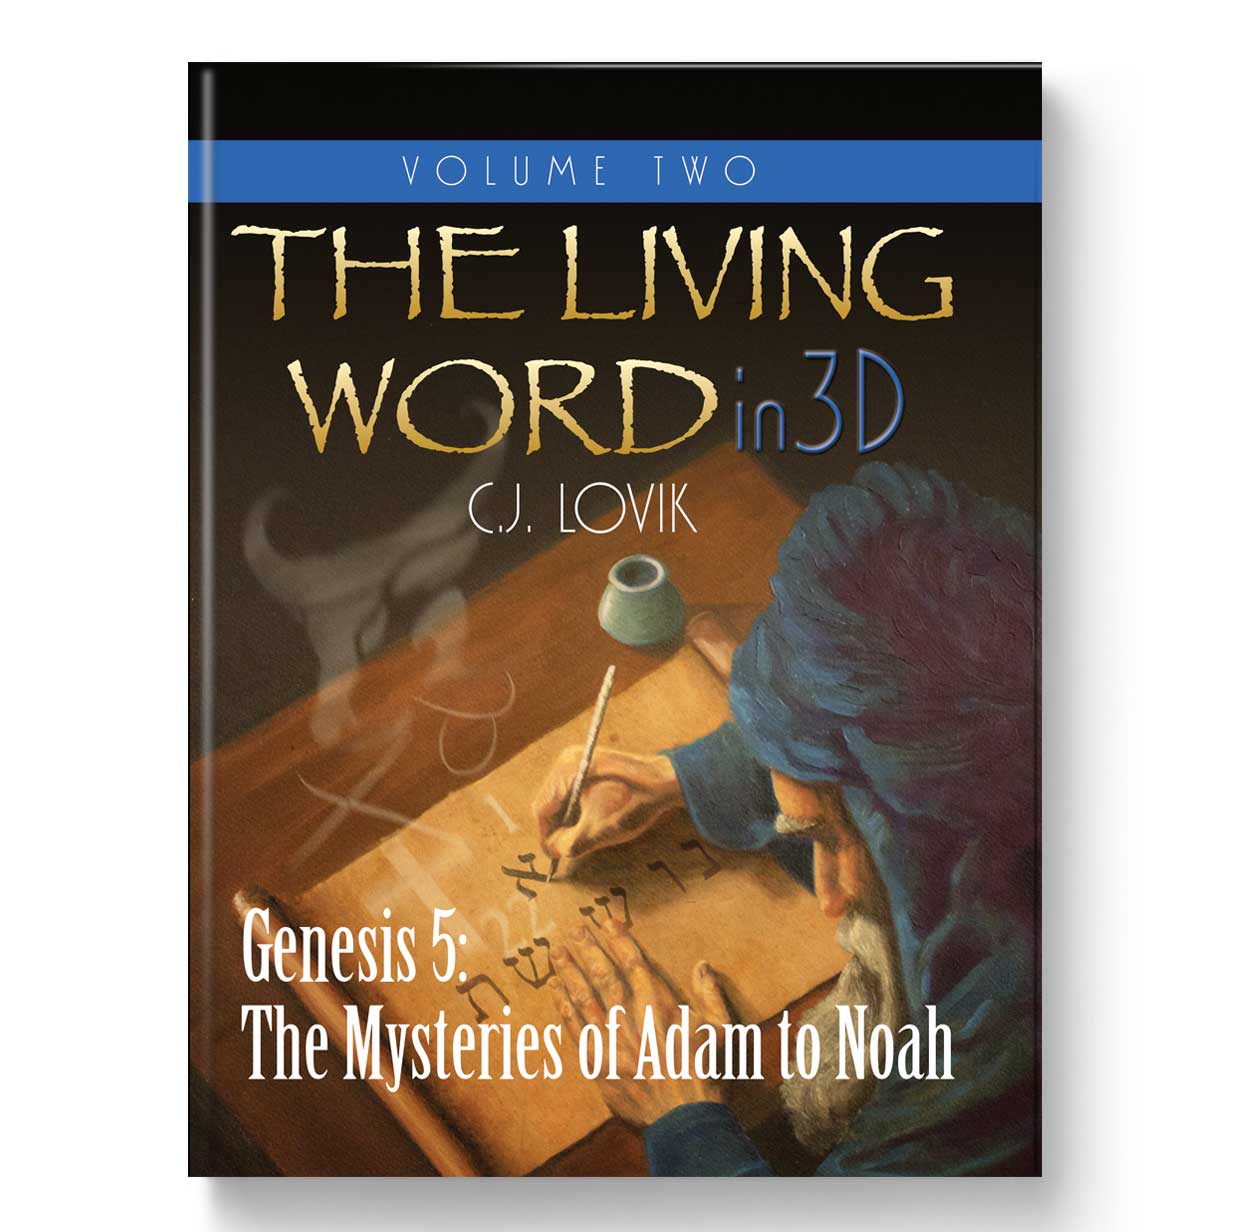 The Living Word in 3D – Volume Two